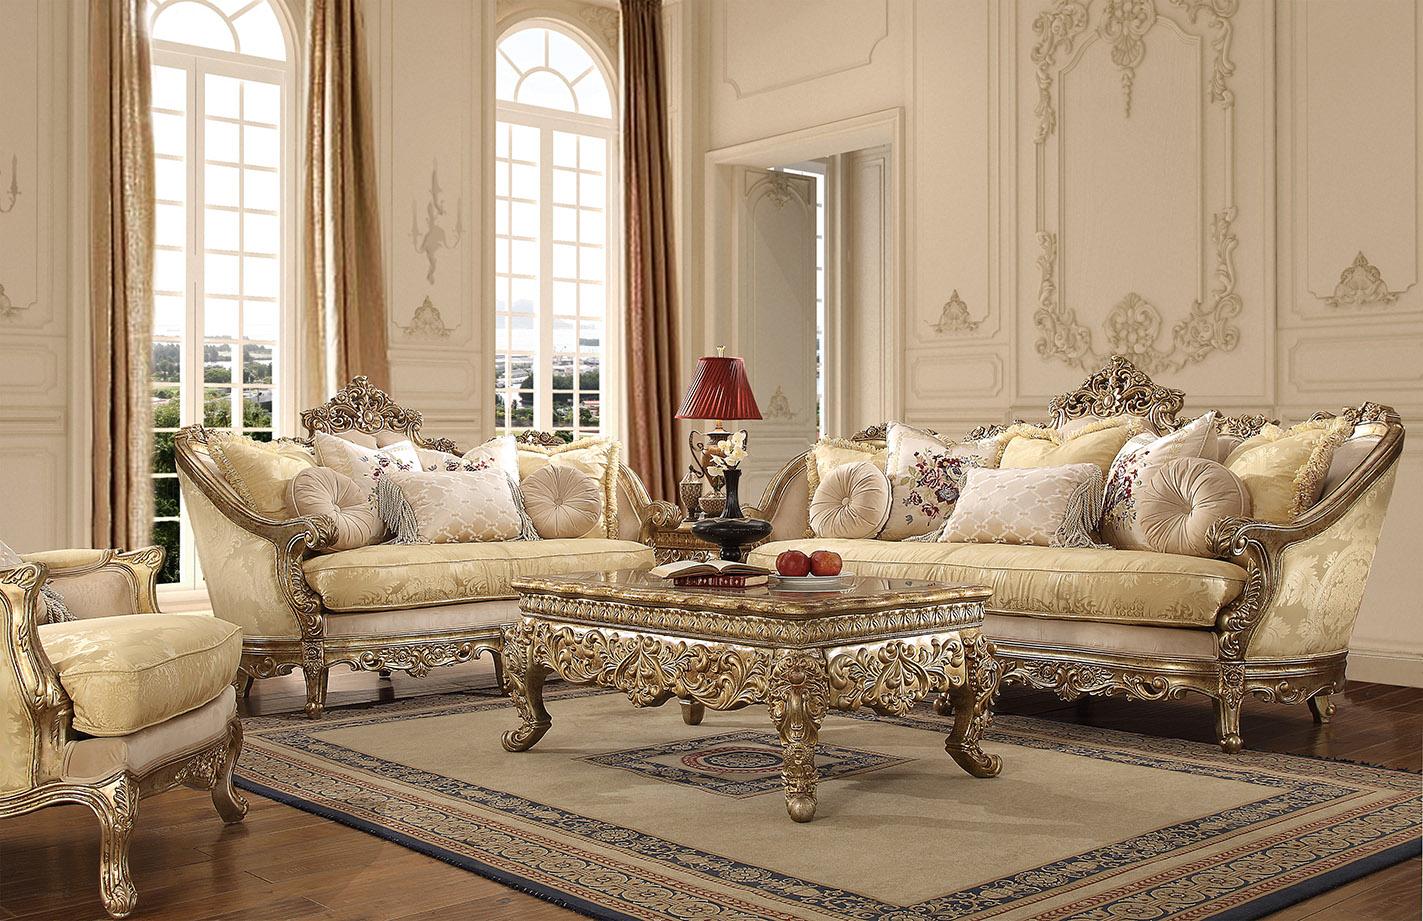 Traditional Sofa Set HD-2626 – 3PC SOFA SET HD-2626-SSET3 in Gold, Champagne Fabric